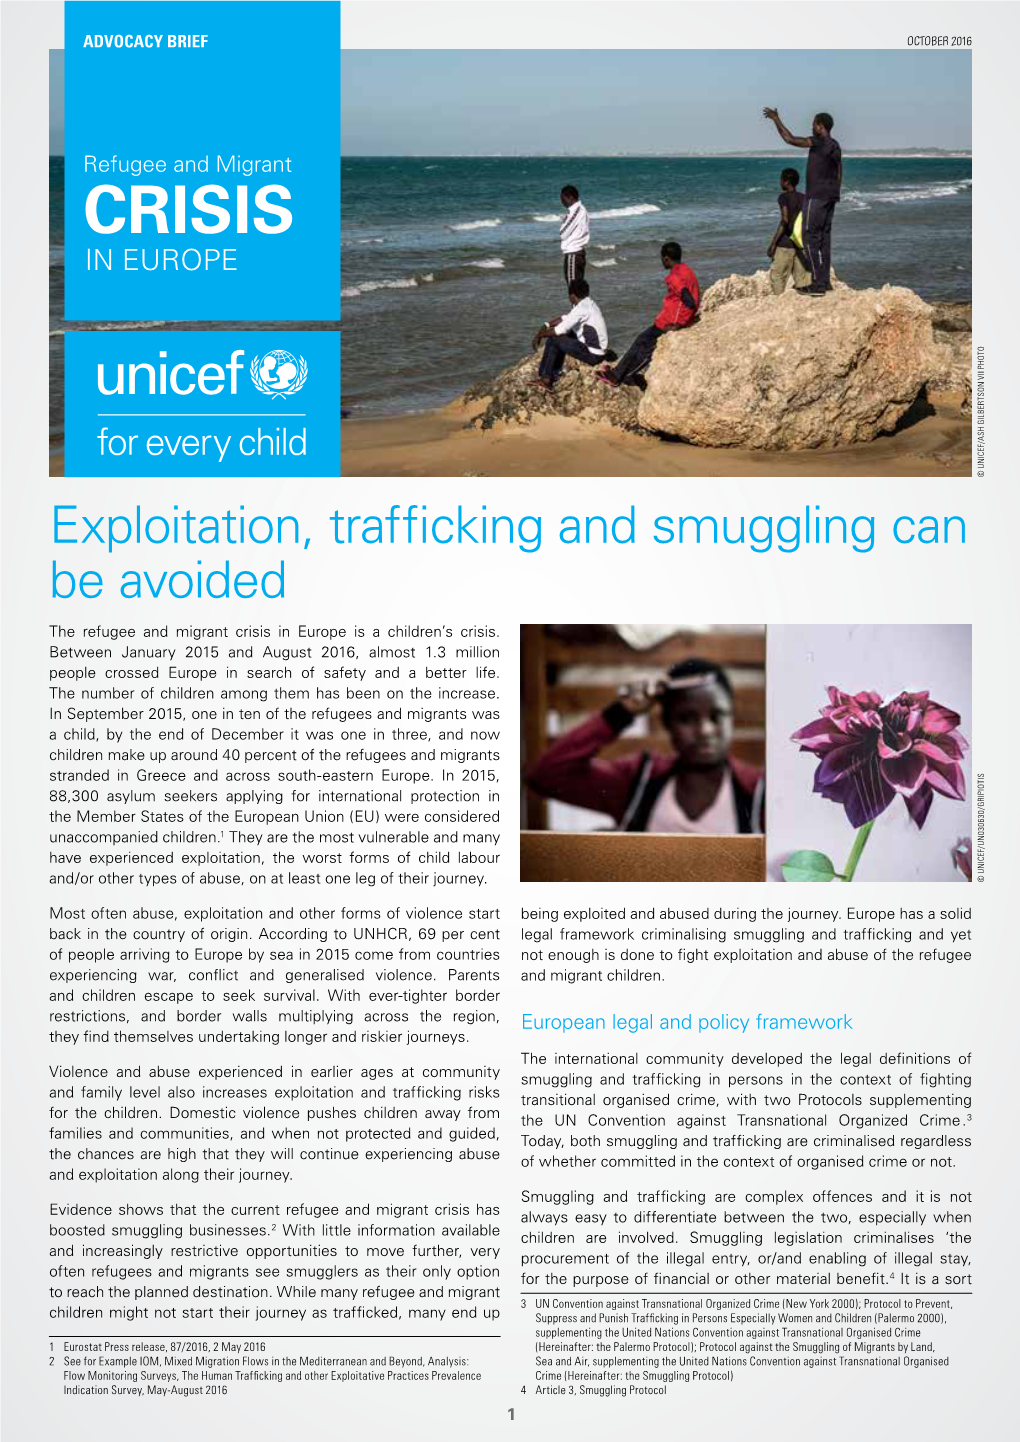 Exploitation, Trafficking and Smuggling Can Be Avoided